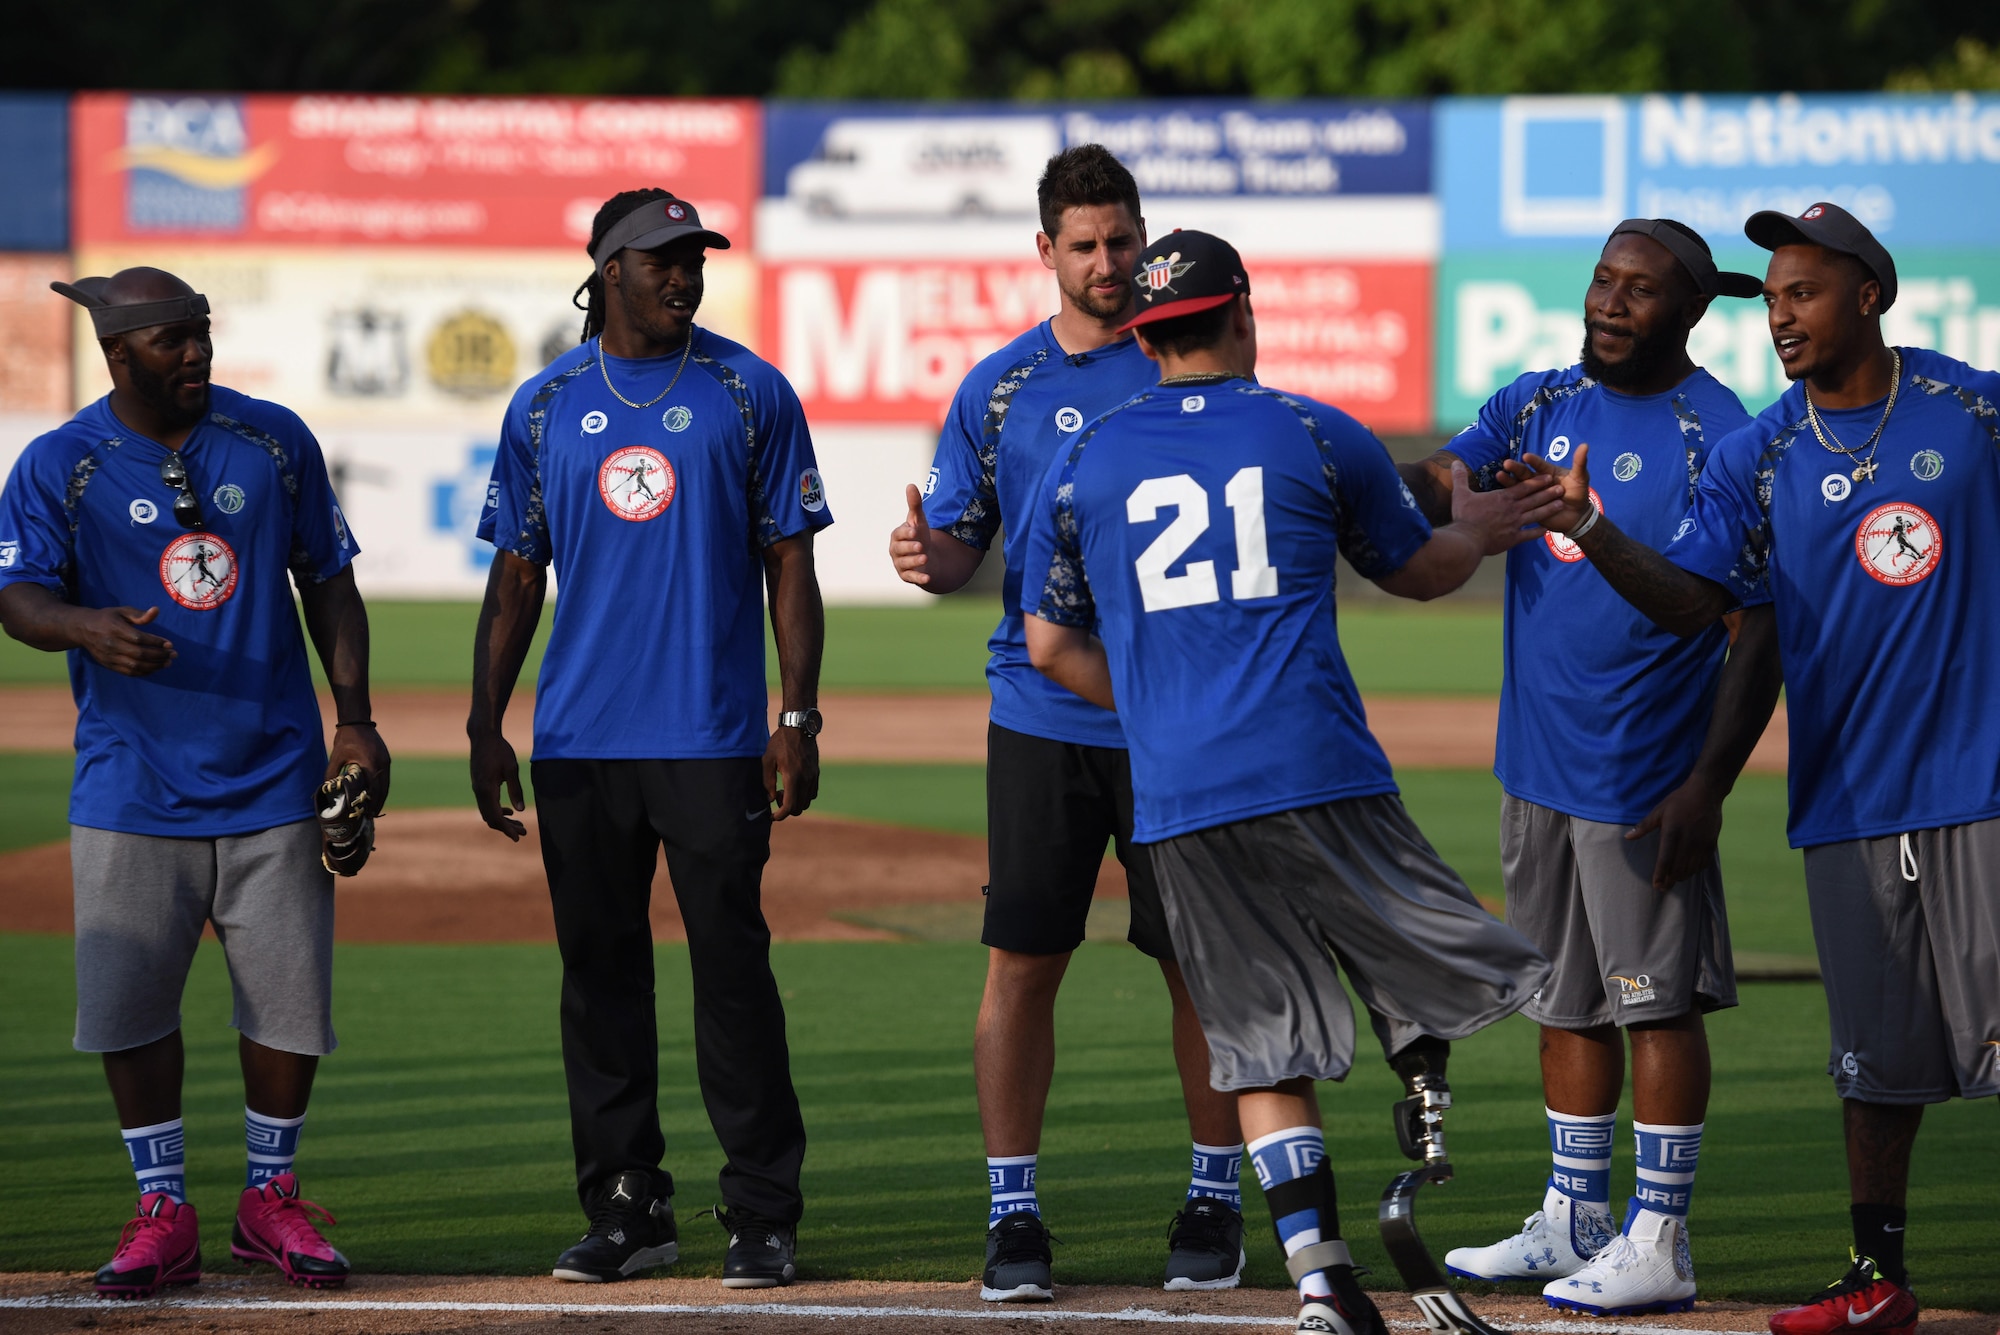 Mike Dreyer, Wounded Warrior Amputee Softball Team, representing the Air Force, shakes hands with his team members during team introductions at the 3rd annual Amputee Warrior Softball Classic June 6, 2015, at Prince George's Stadium in Bowie, Md. (U.S. Air Force Photo/Staff Sgt. Carlin Leslie)